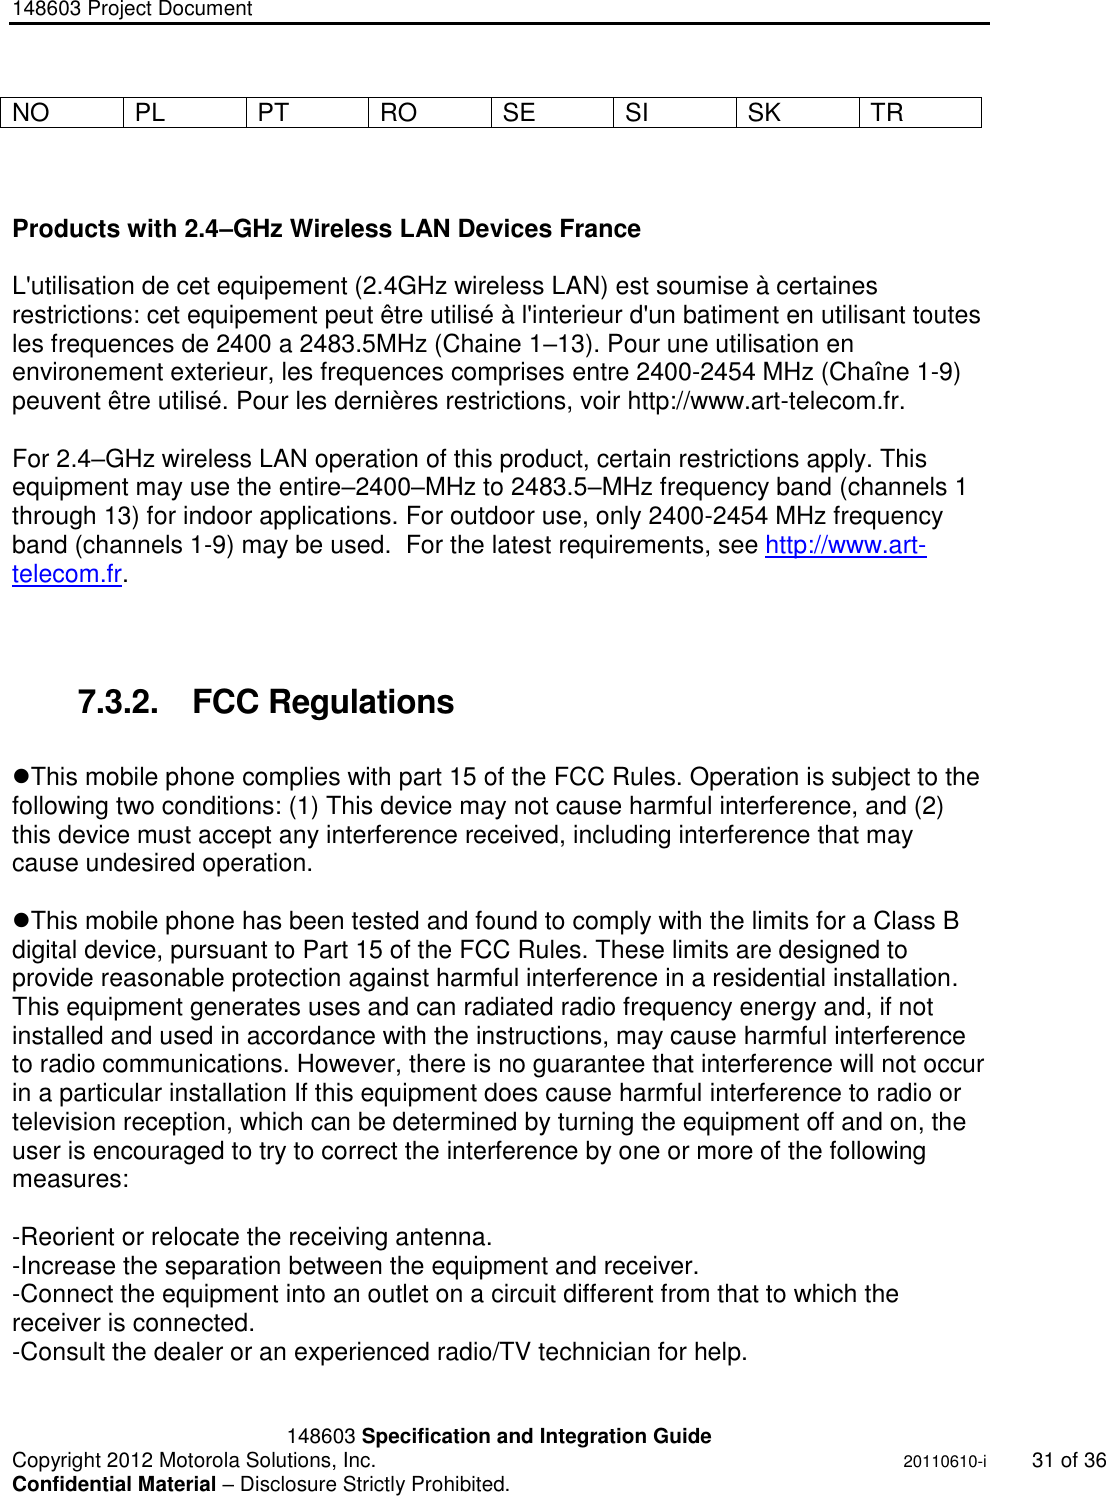 148603 Project Document       148603 Specification and Integration Guide  Copyright 2012 Motorola Solutions, Inc.    20110610-i 31 of 36 Confidential Material – Disclosure Strictly Prohibited. &quot;Ni ckel Leucochroic  Puffin&quot; NO PL PT RO SE SI SK TR    Products with 2.4–GHz Wireless LAN Devices France  L&apos;utilisation de cet equipement (2.4GHz wireless LAN) est soumise à certaines restrictions: cet equipement peut être utilisé à l&apos;interieur d&apos;un batiment en utilisant toutes les frequences de 2400 a 2483.5MHz (Chaine 1–13). Pour une utilisation en environement exterieur, les frequences comprises entre 2400-2454 MHz (Chaîne 1-9) peuvent être utilisé. Pour les dernières restrictions, voir http://www.art-telecom.fr.  For 2.4–GHz wireless LAN operation of this product, certain restrictions apply. This equipment may use the entire–2400–MHz to 2483.5–MHz frequency band (channels 1 through 13) for indoor applications. For outdoor use, only 2400-2454 MHz frequency band (channels 1-9) may be used.  For the latest requirements, see http://www.art-telecom.fr.    7.3.2.  FCC Regulations  This mobile phone complies with part 15 of the FCC Rules. Operation is subject to the following two conditions: (1) This device may not cause harmful interference, and (2) this device must accept any interference received, including interference that may cause undesired operation.  This mobile phone has been tested and found to comply with the limits for a Class B digital device, pursuant to Part 15 of the FCC Rules. These limits are designed to provide reasonable protection against harmful interference in a residential installation. This equipment generates uses and can radiated radio frequency energy and, if not installed and used in accordance with the instructions, may cause harmful interference to radio communications. However, there is no guarantee that interference will not occur in a particular installation If this equipment does cause harmful interference to radio or television reception, which can be determined by turning the equipment off and on, the user is encouraged to try to correct the interference by one or more of the following measures:  -Reorient or relocate the receiving antenna. -Increase the separation between the equipment and receiver. -Connect the equipment into an outlet on a circuit different from that to which the receiver is connected. -Consult the dealer or an experienced radio/TV technician for help.  